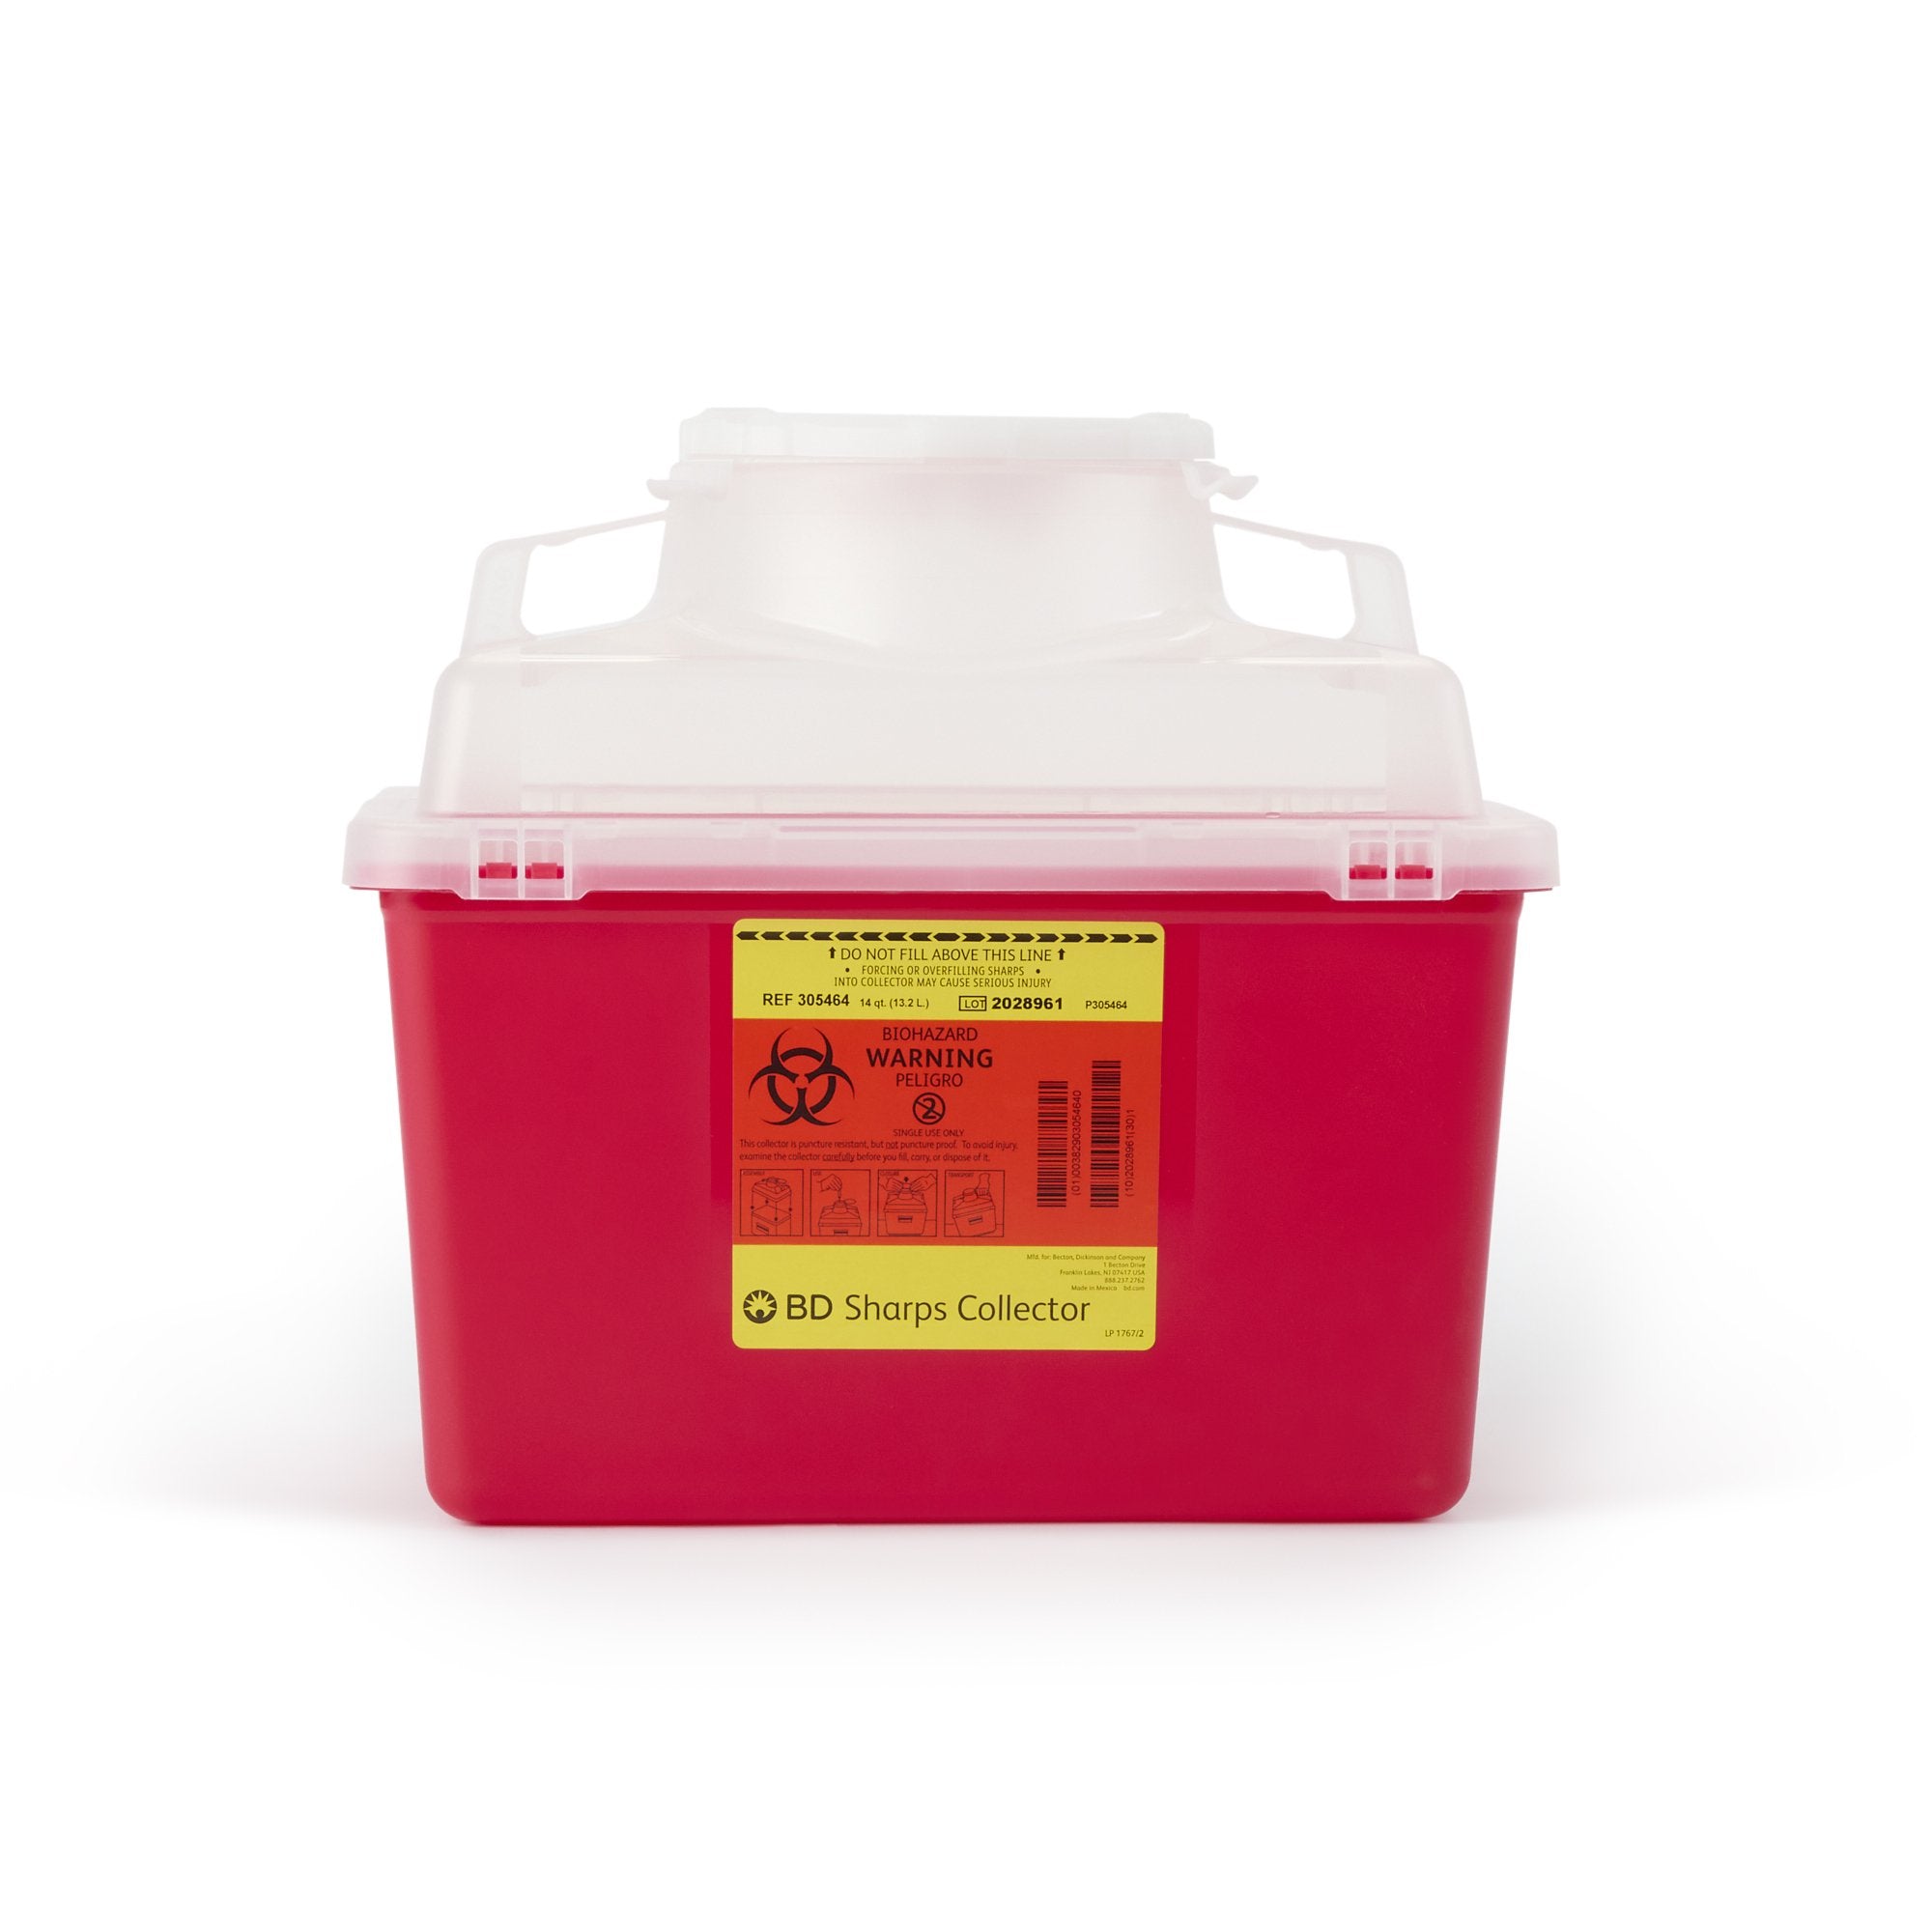 Sharps Container BD Red Base 11-1/2 H X 12-4/5 W X 8-4/5 D Inch Vertical Entry 3.5 Gallon